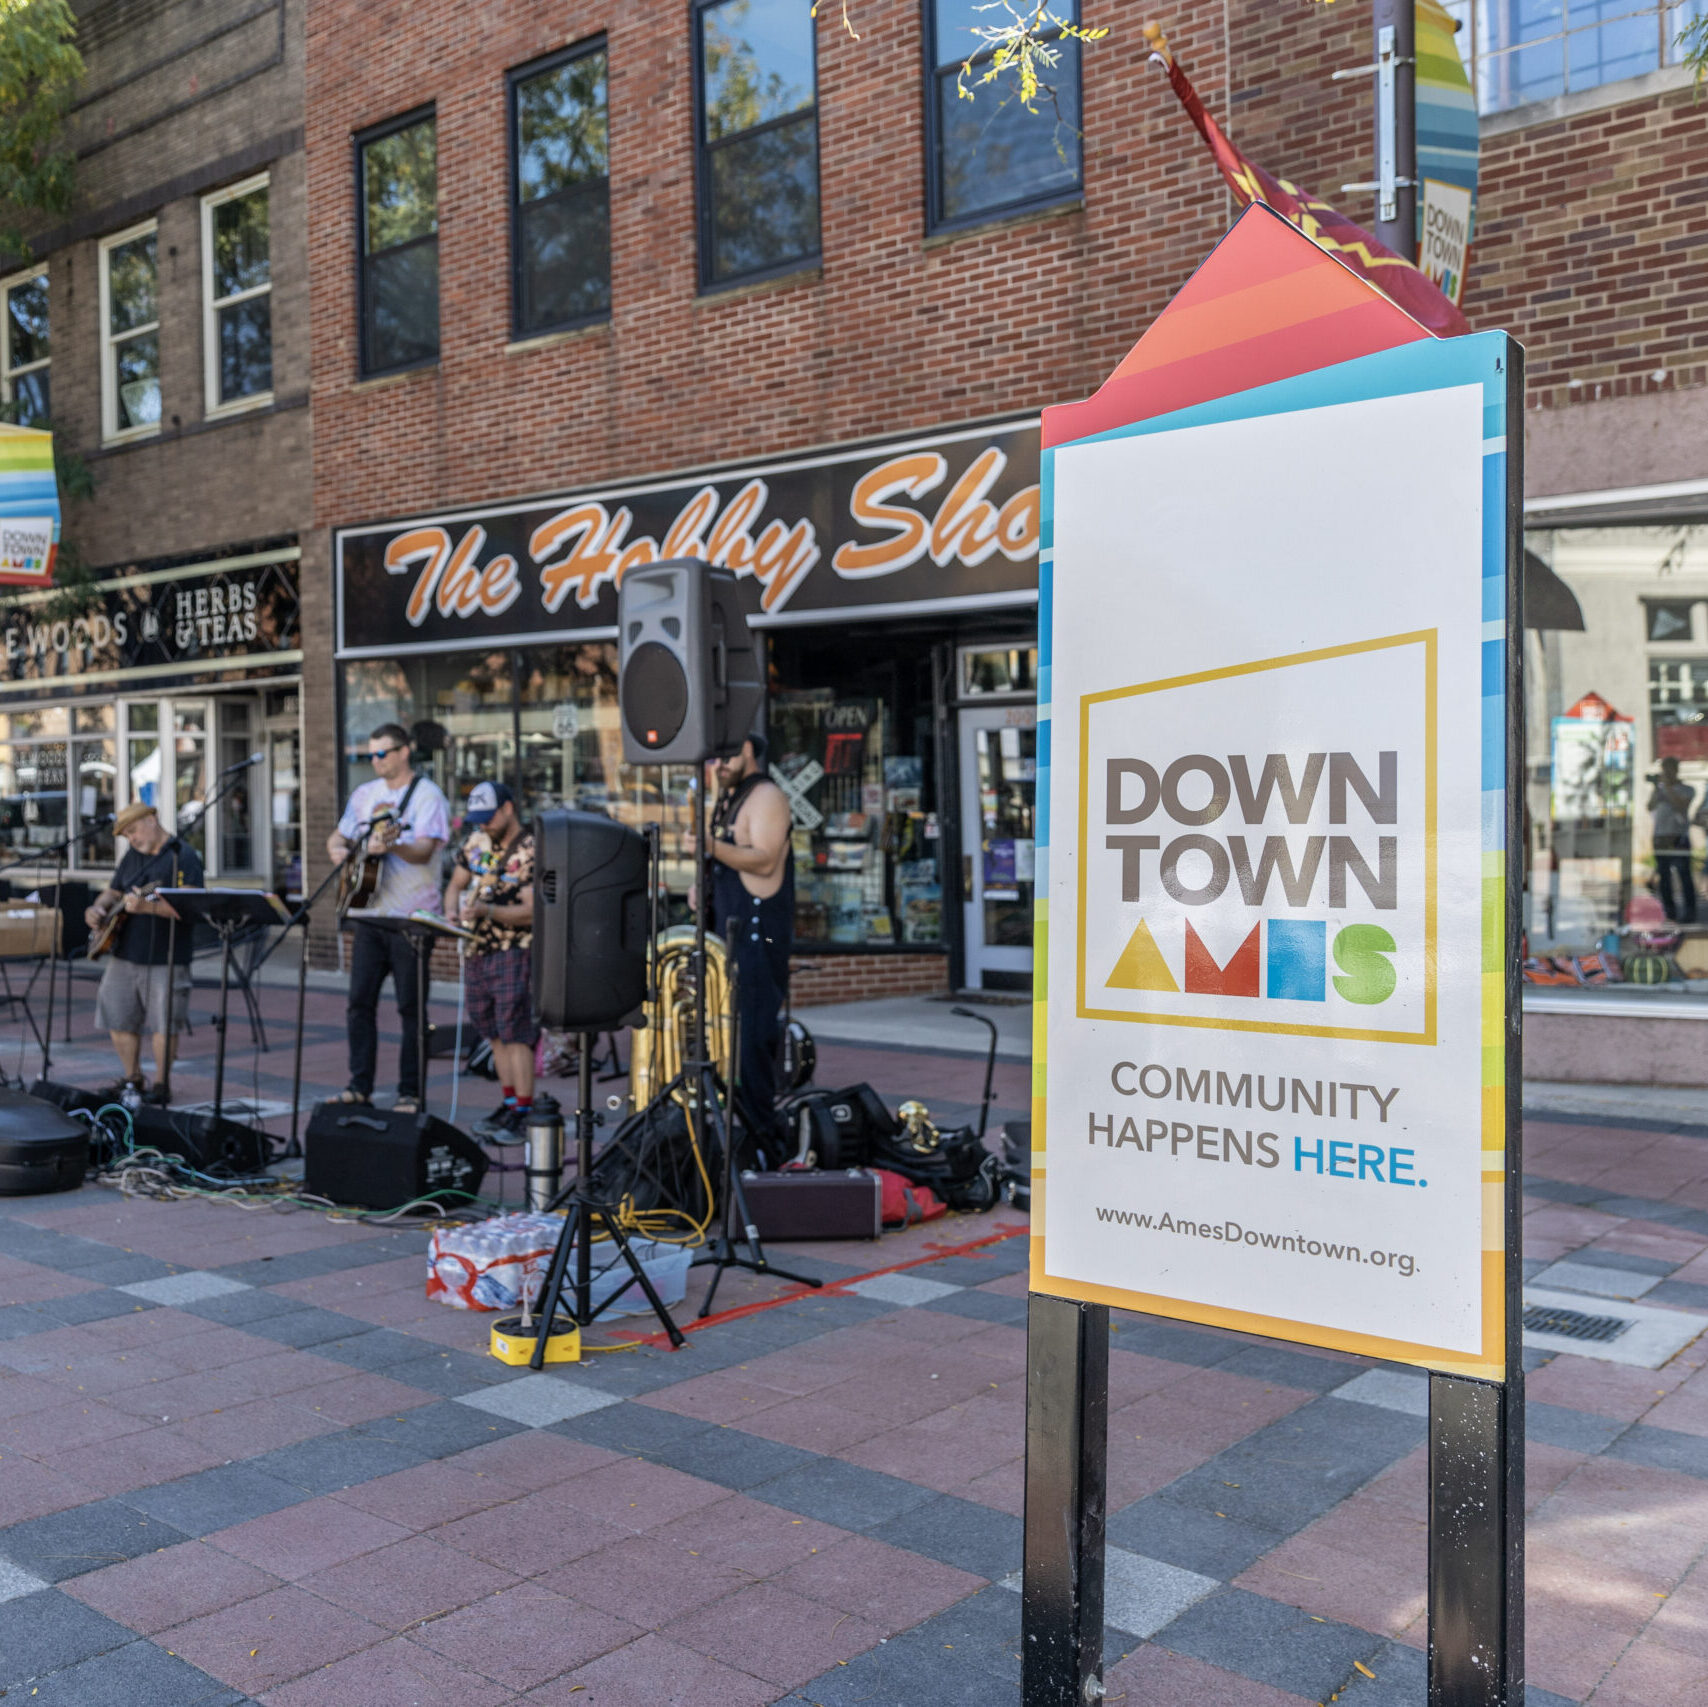 A live band playing on Main Street in downtown Ames.